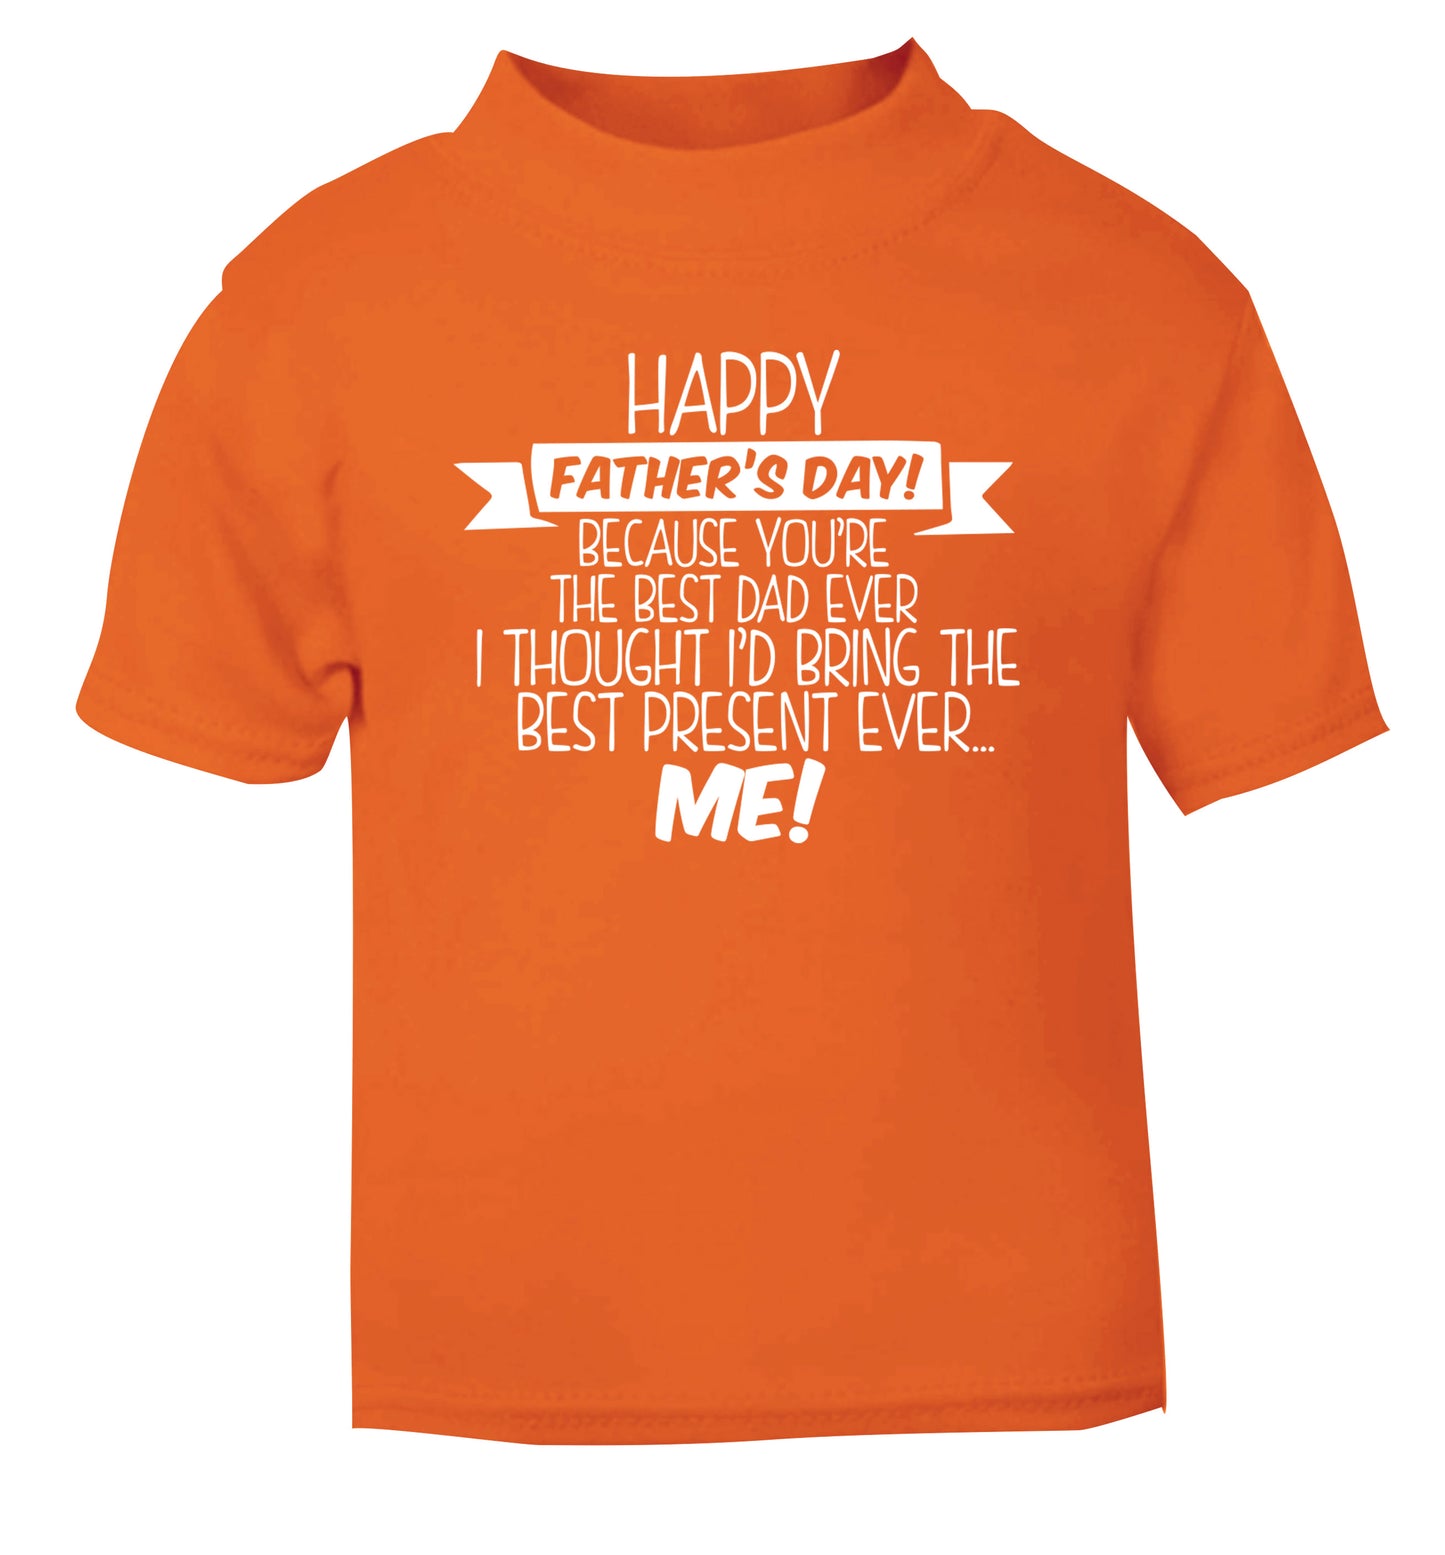 Happy Father's day, because you're the best dad ever I thought I'd bring the best present ever...me! orange Baby Toddler Tshirt 2 Years